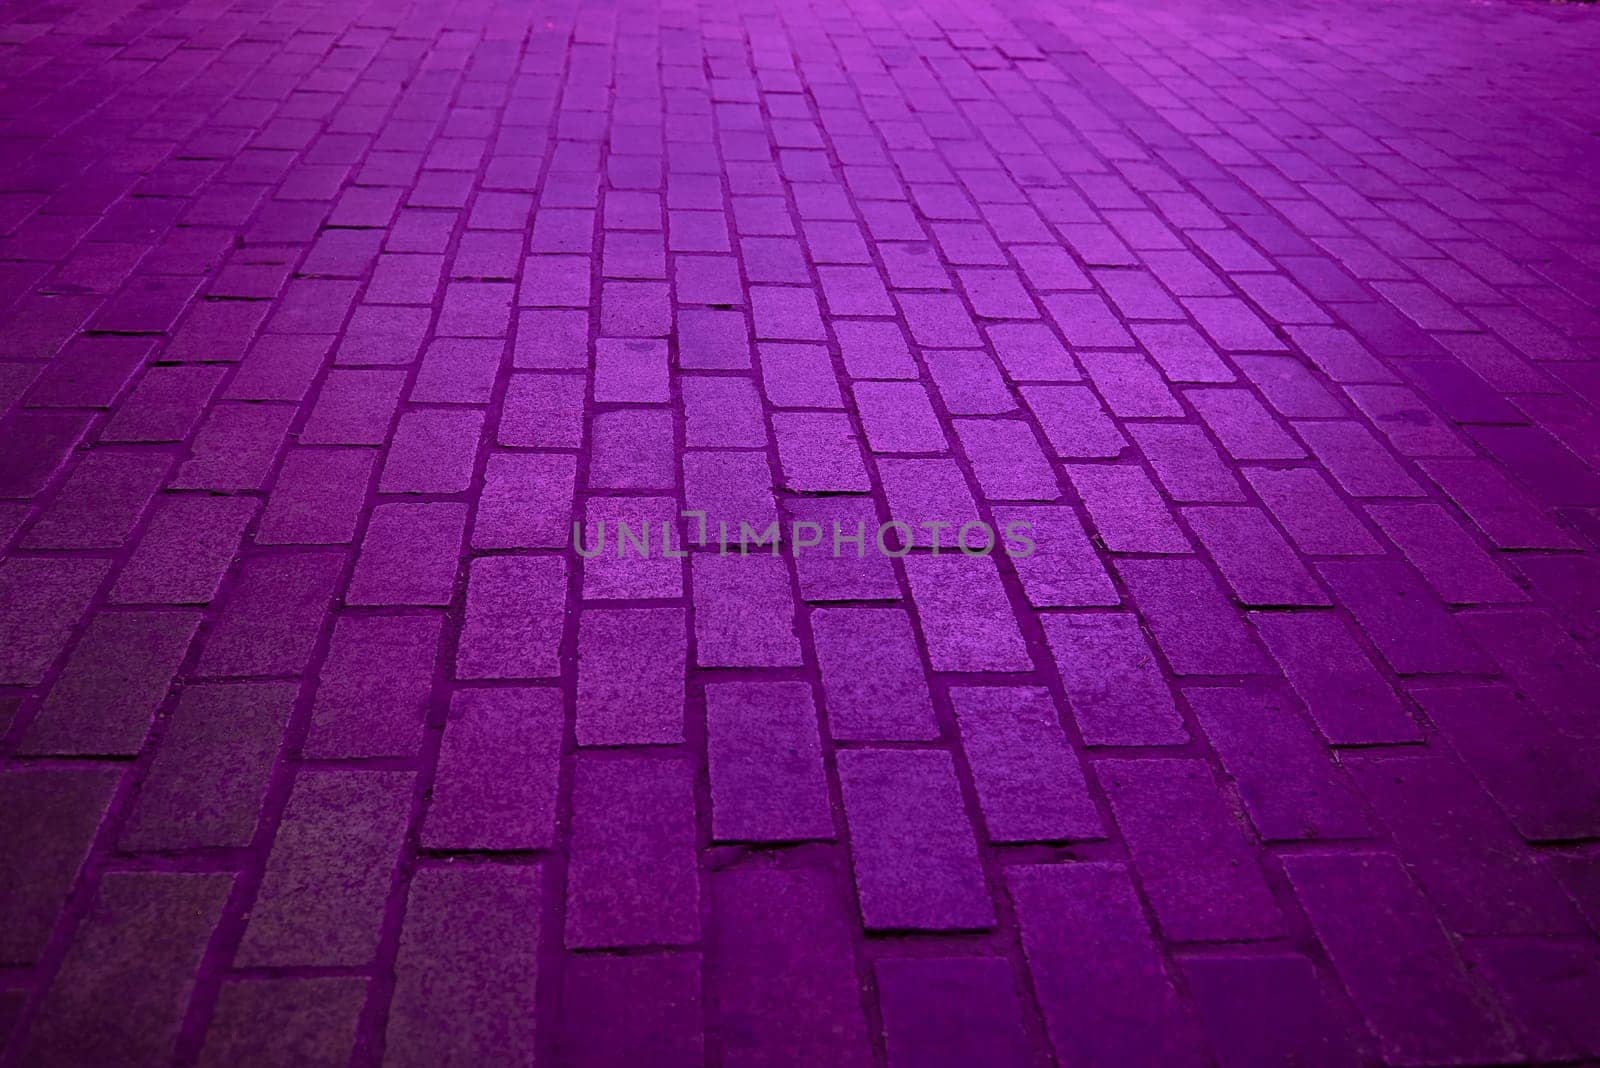 Background. Rectangular cobblestone street with purple light.No one, parallel, perpendicular, perspective depth